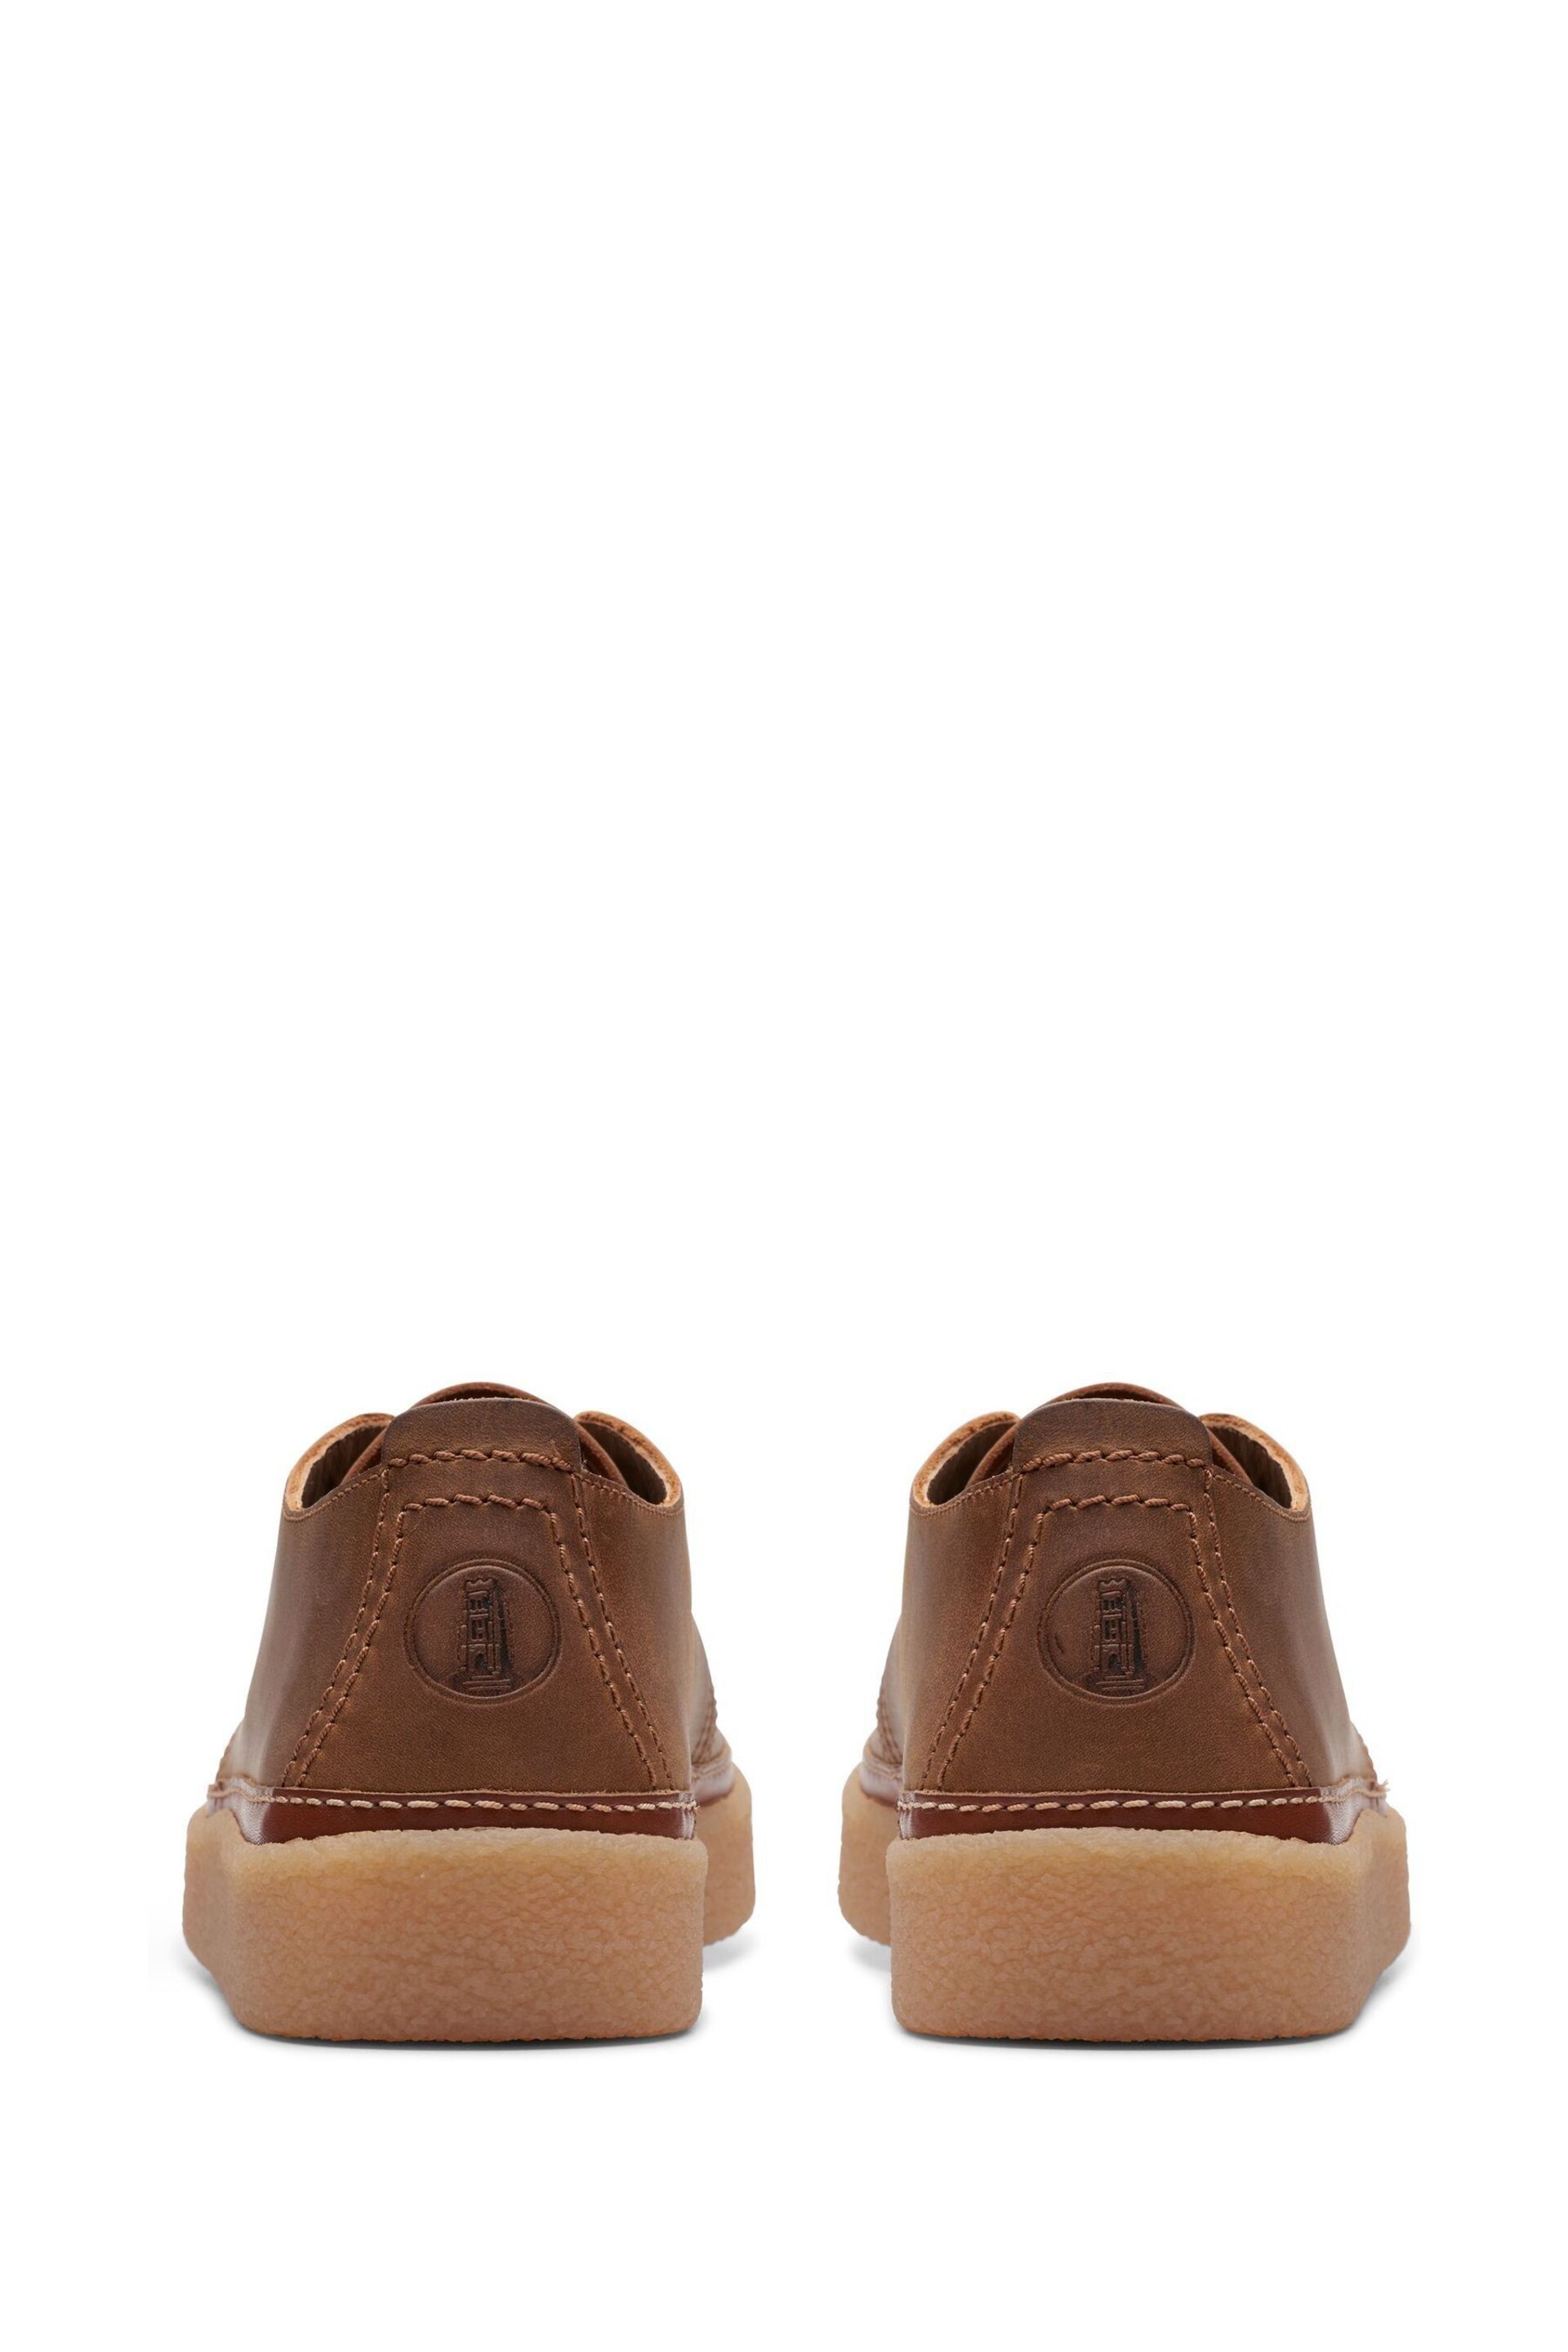 Clarks Brown Beeswax Leather Clarkwood Low Shoes - Image 3 of 6